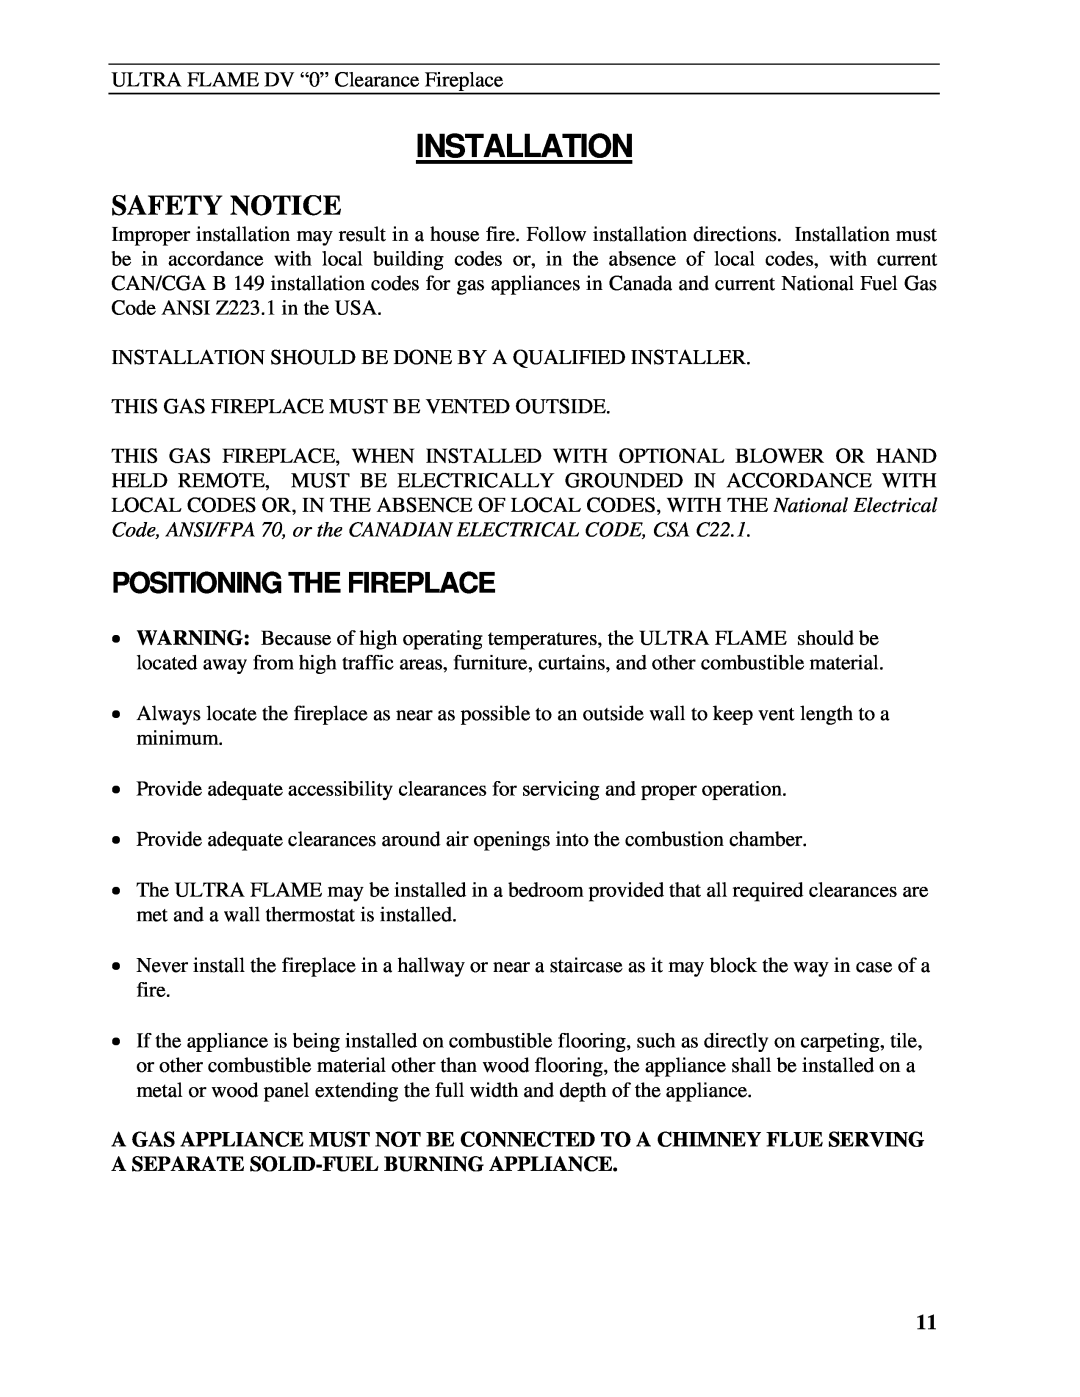 Drolet DG05437/DG05447 manual Installation, Safety Notice, Positioning The Fireplace 